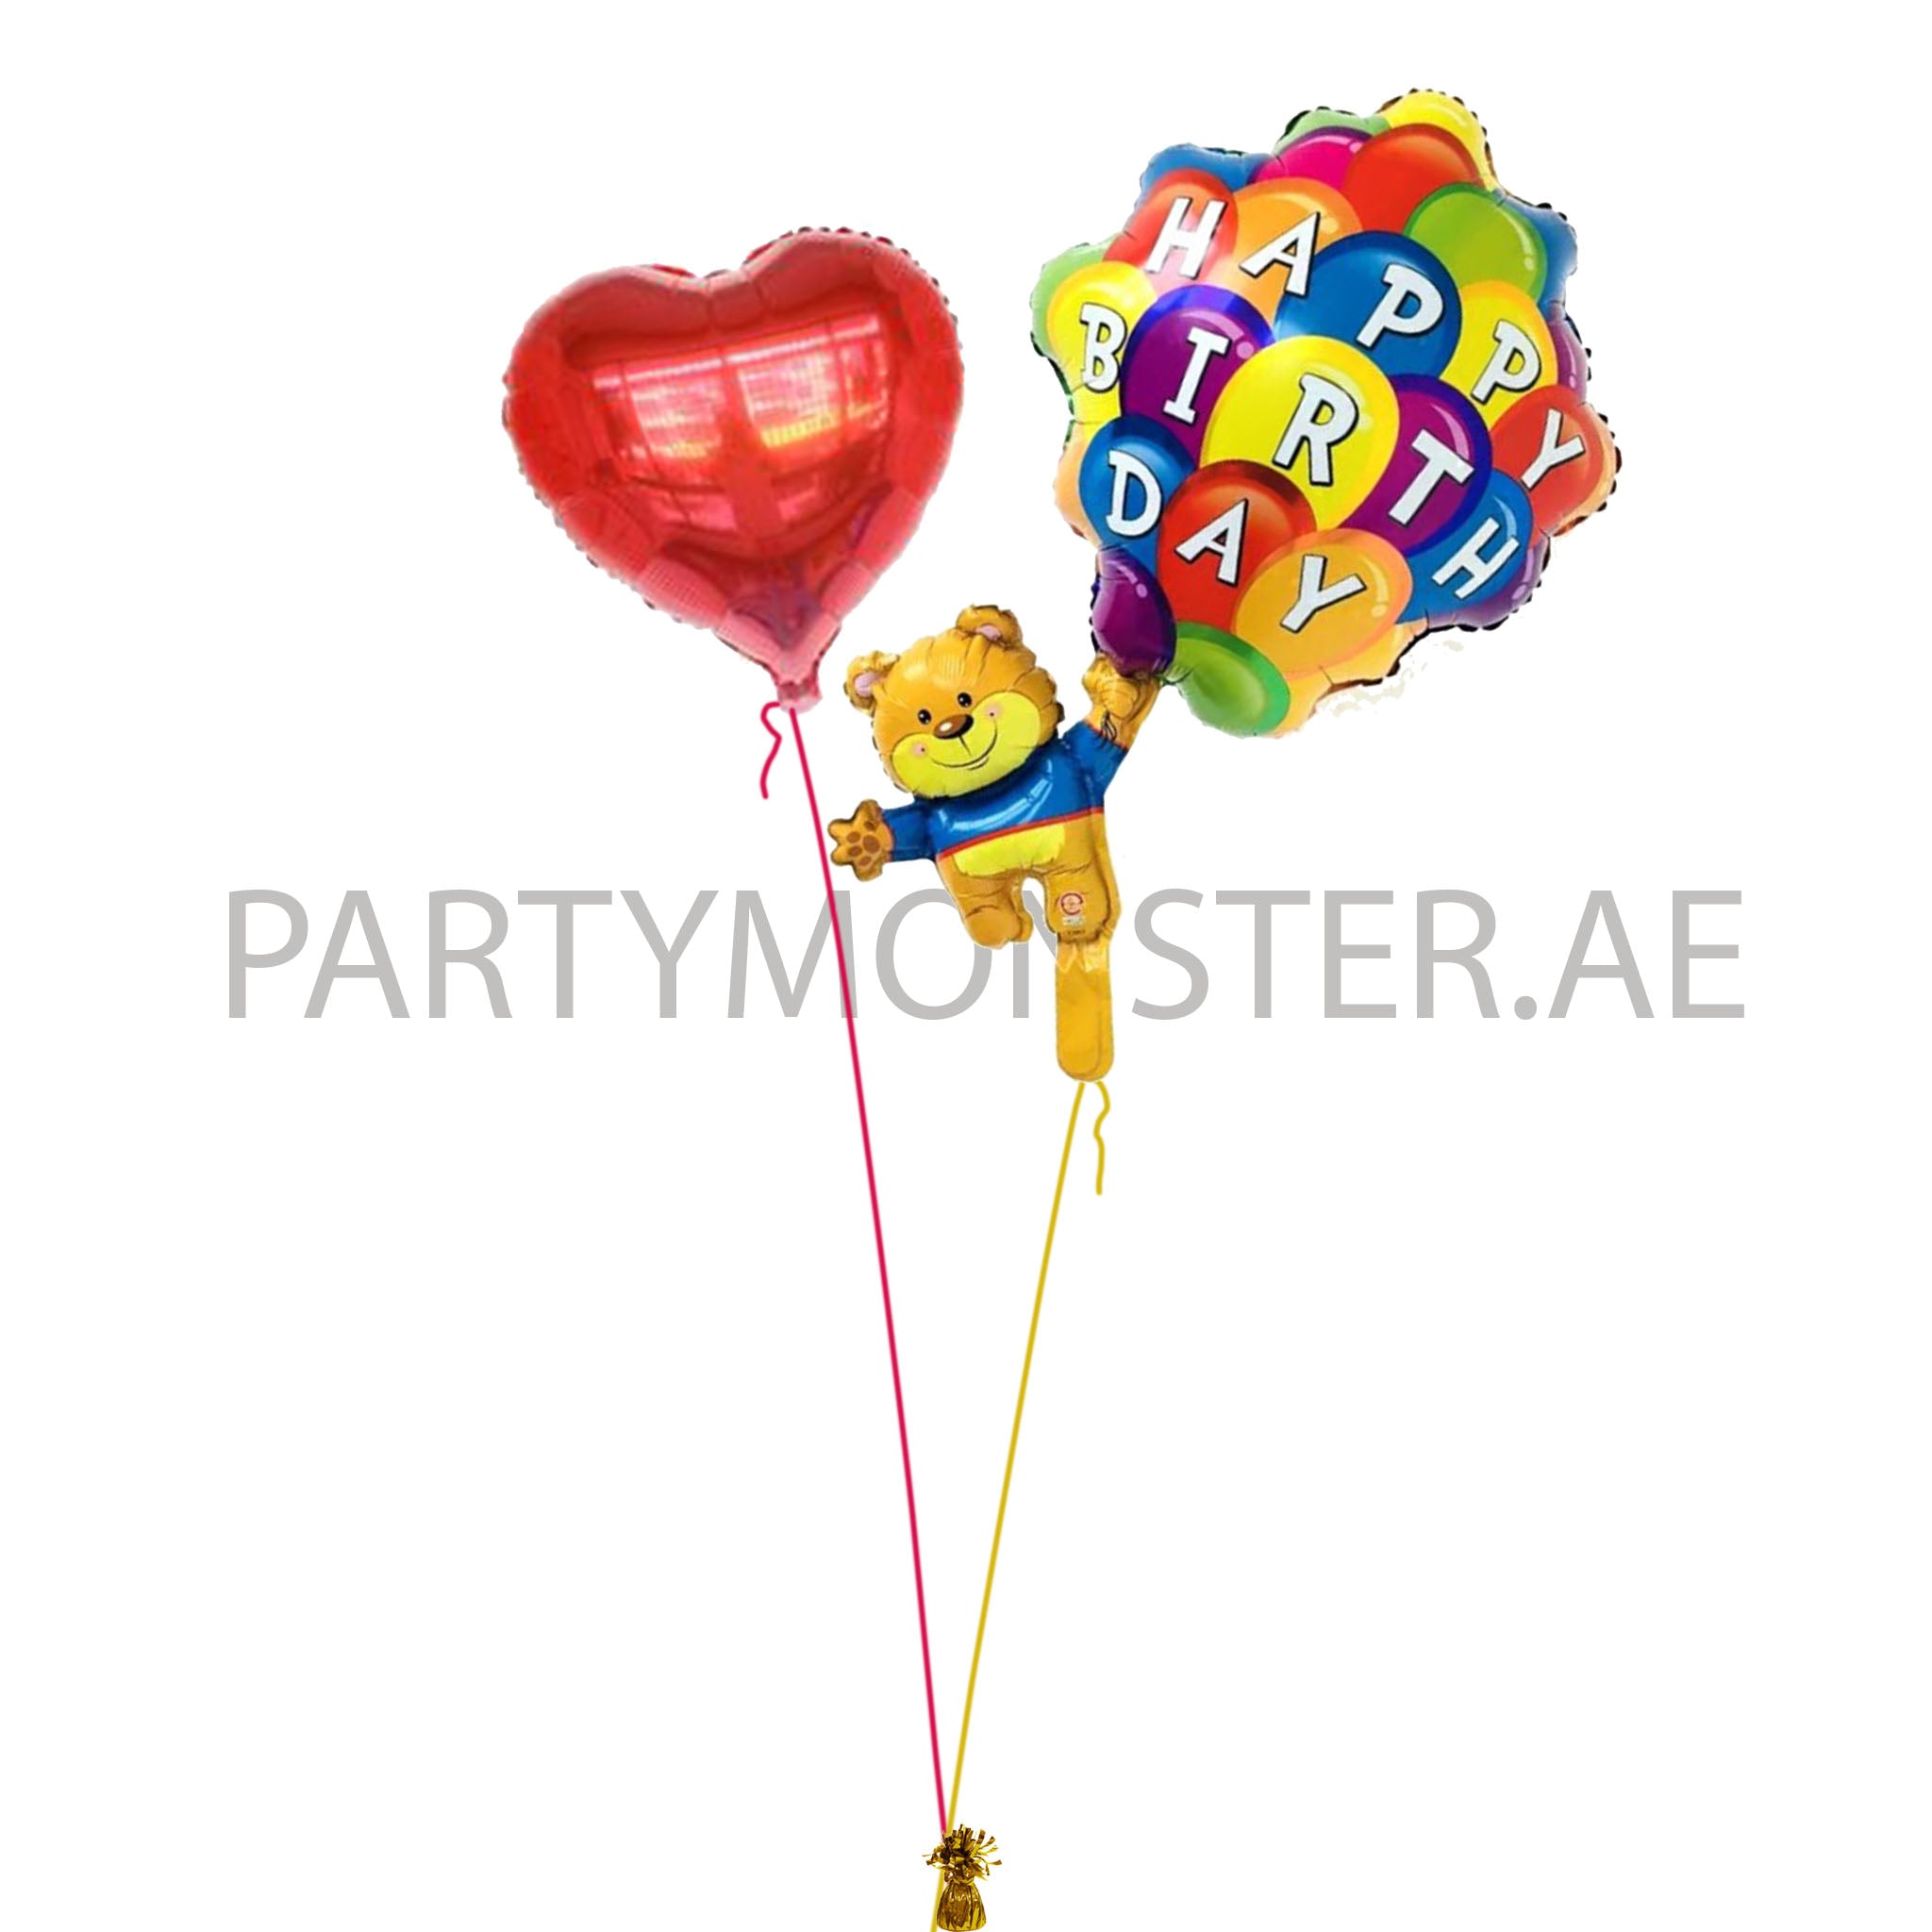 Happy Birthday Love foil balloons bouquet - PartyMonster.ae